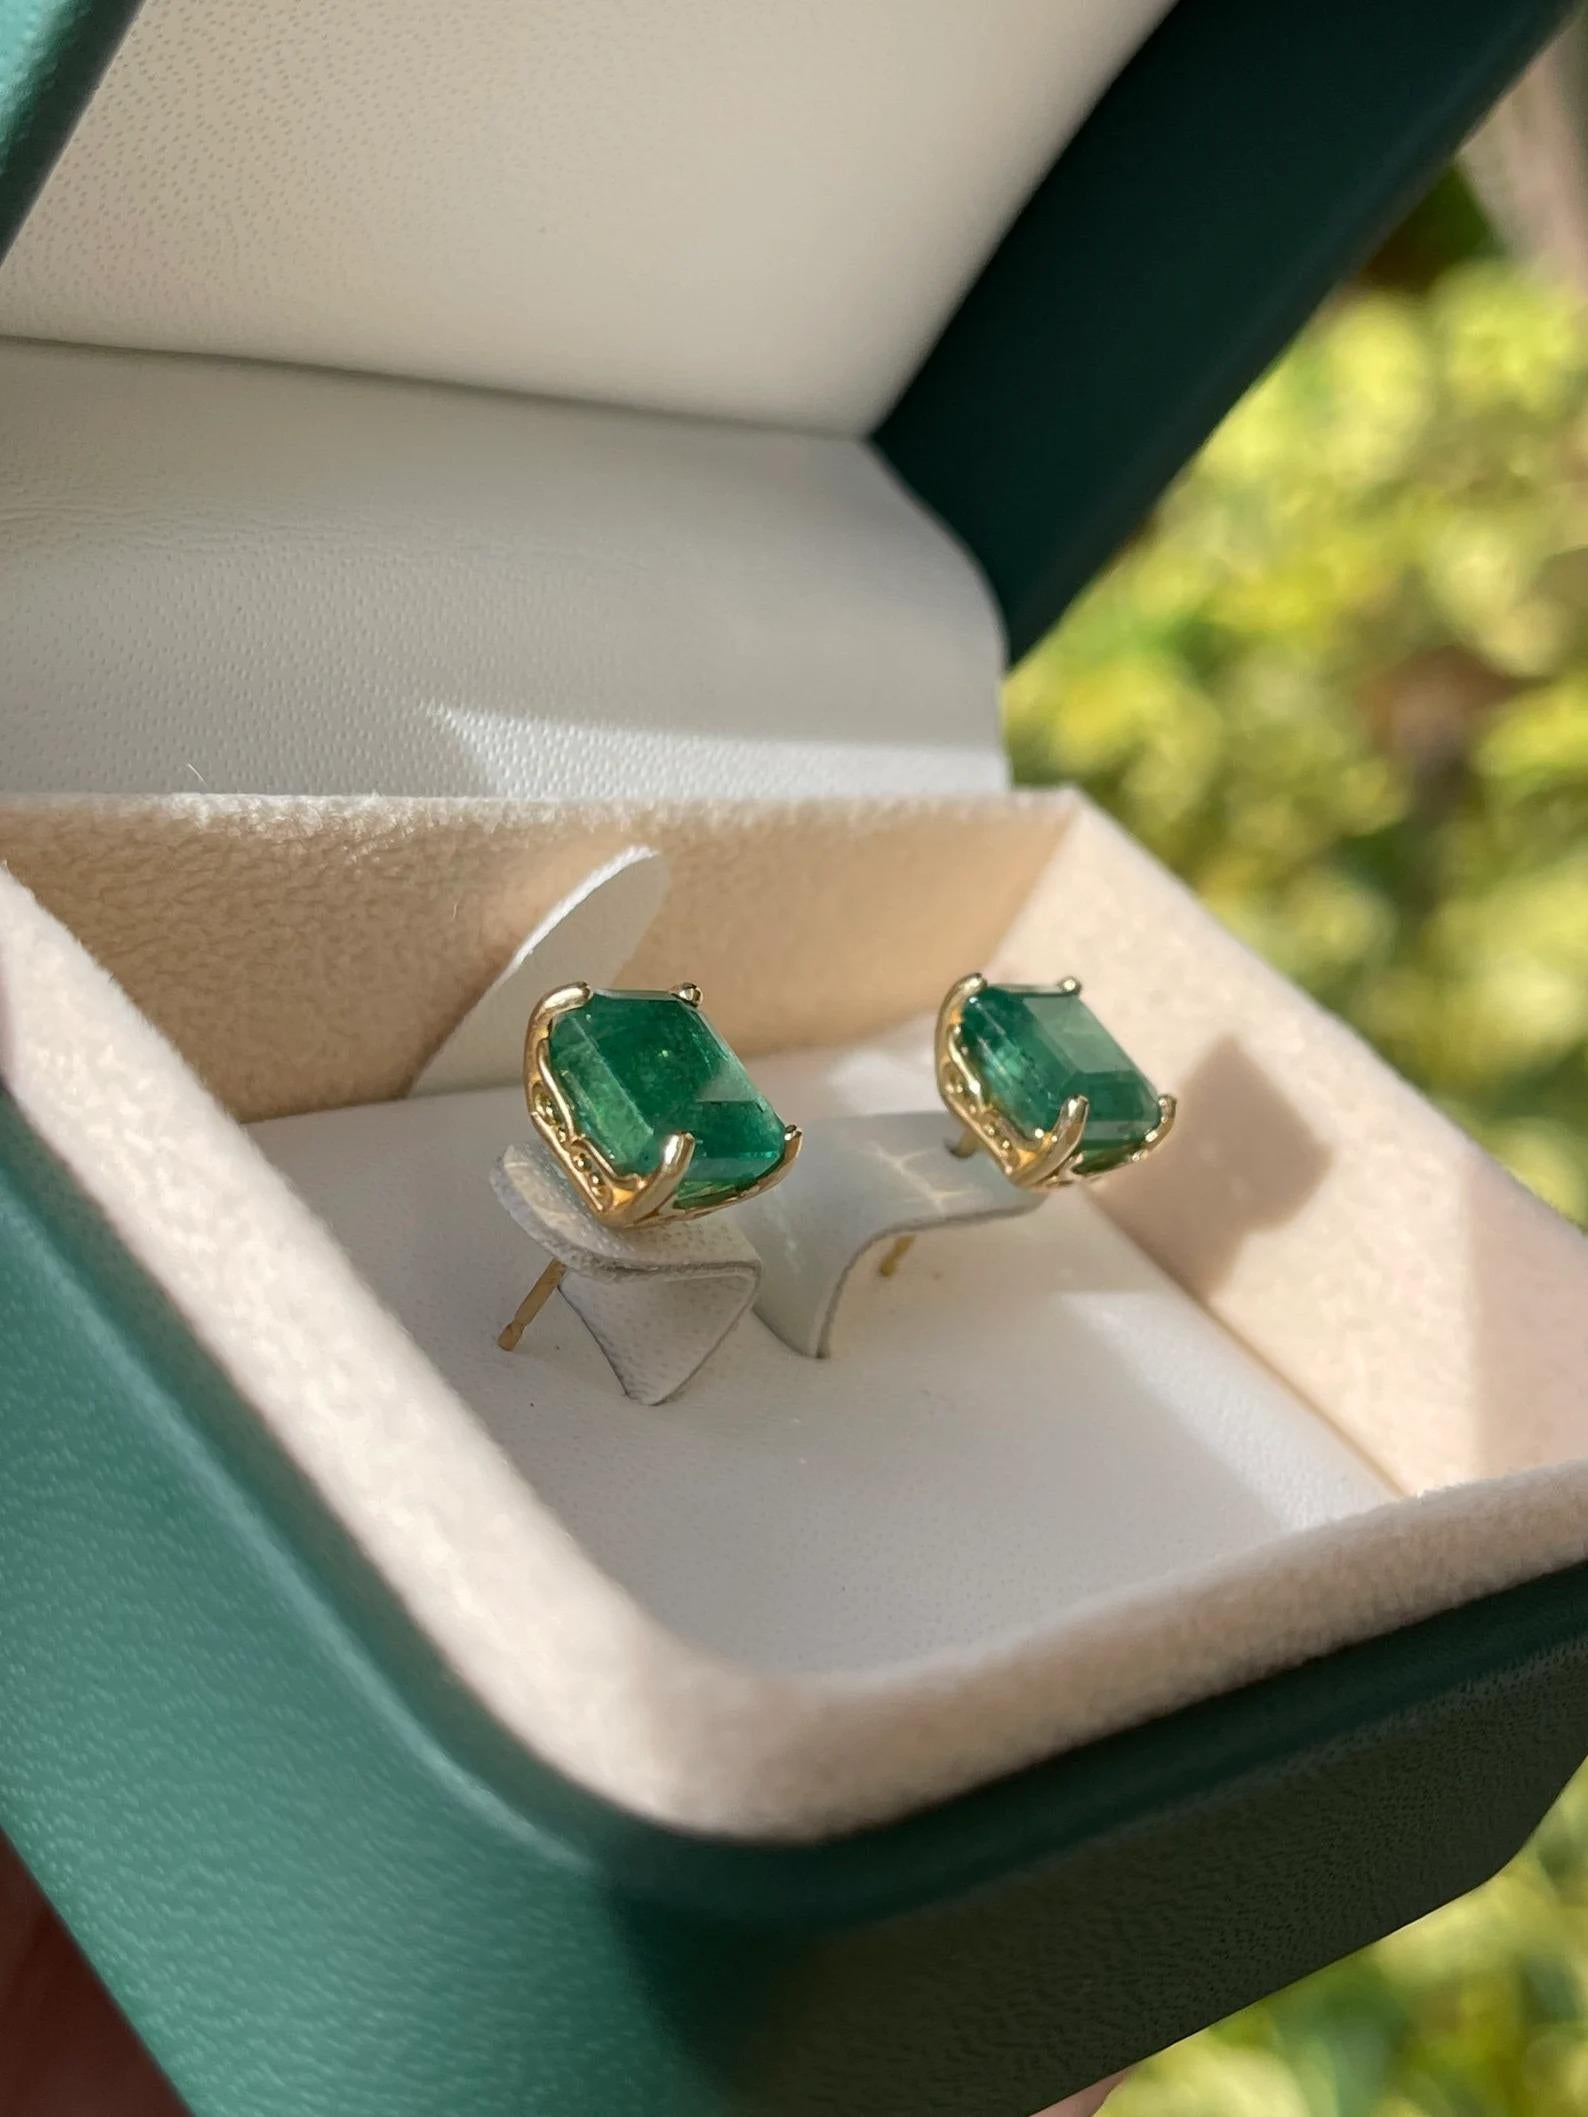 6.0tcw Full Ear Coverage Natural Green Emerald Stud Earrings Yellow Gold 14K In New Condition For Sale In Jupiter, FL